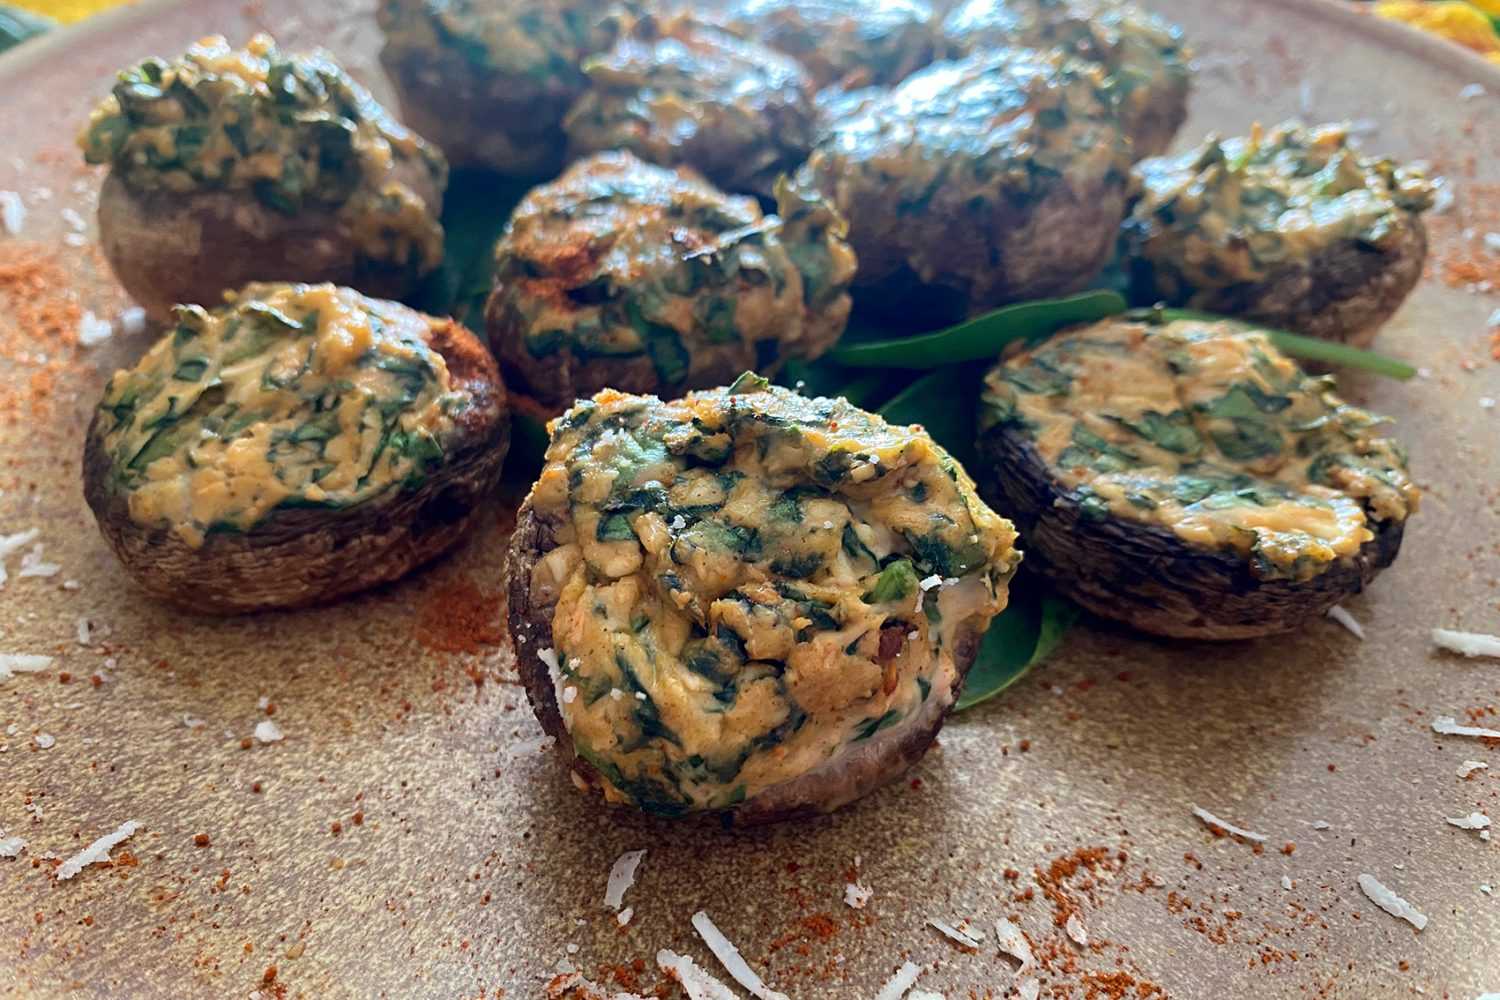 Roasted mushrooms filled with cheese and chopped spinach mixture on brown plate